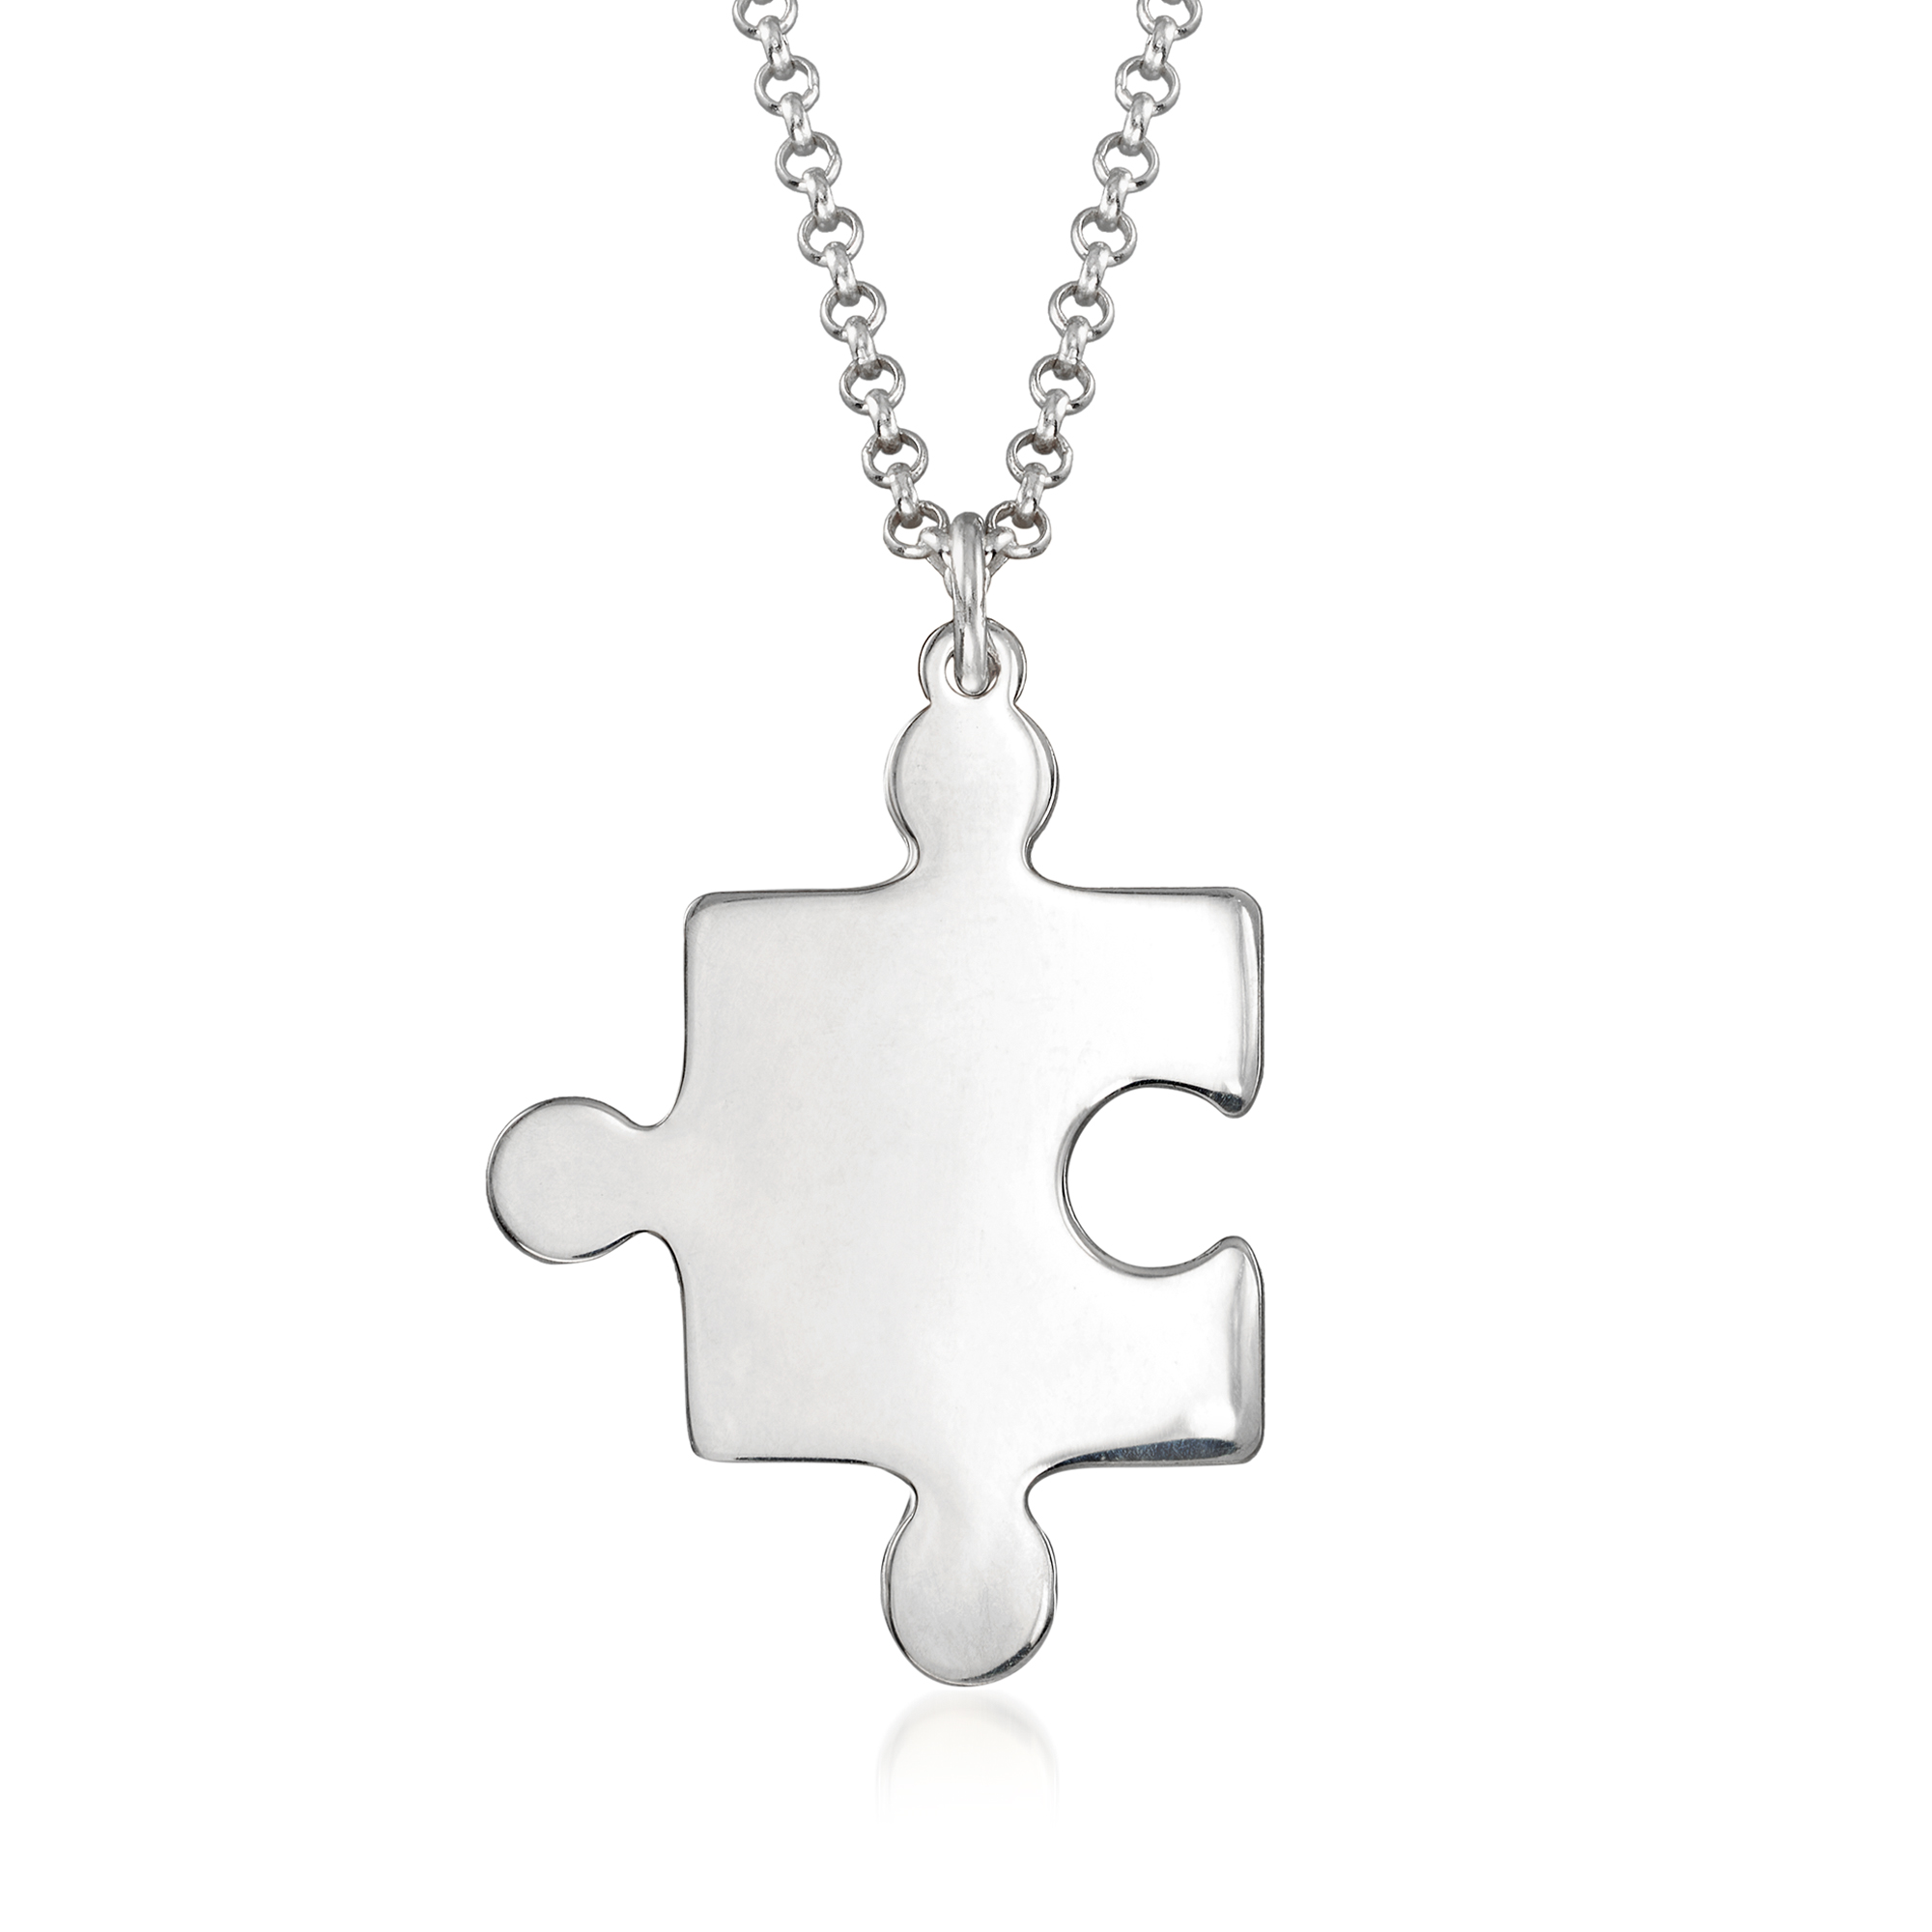 Azaggi Sterling Silver Handcrafted Outlined Puzzle Piece Pendant Necklace